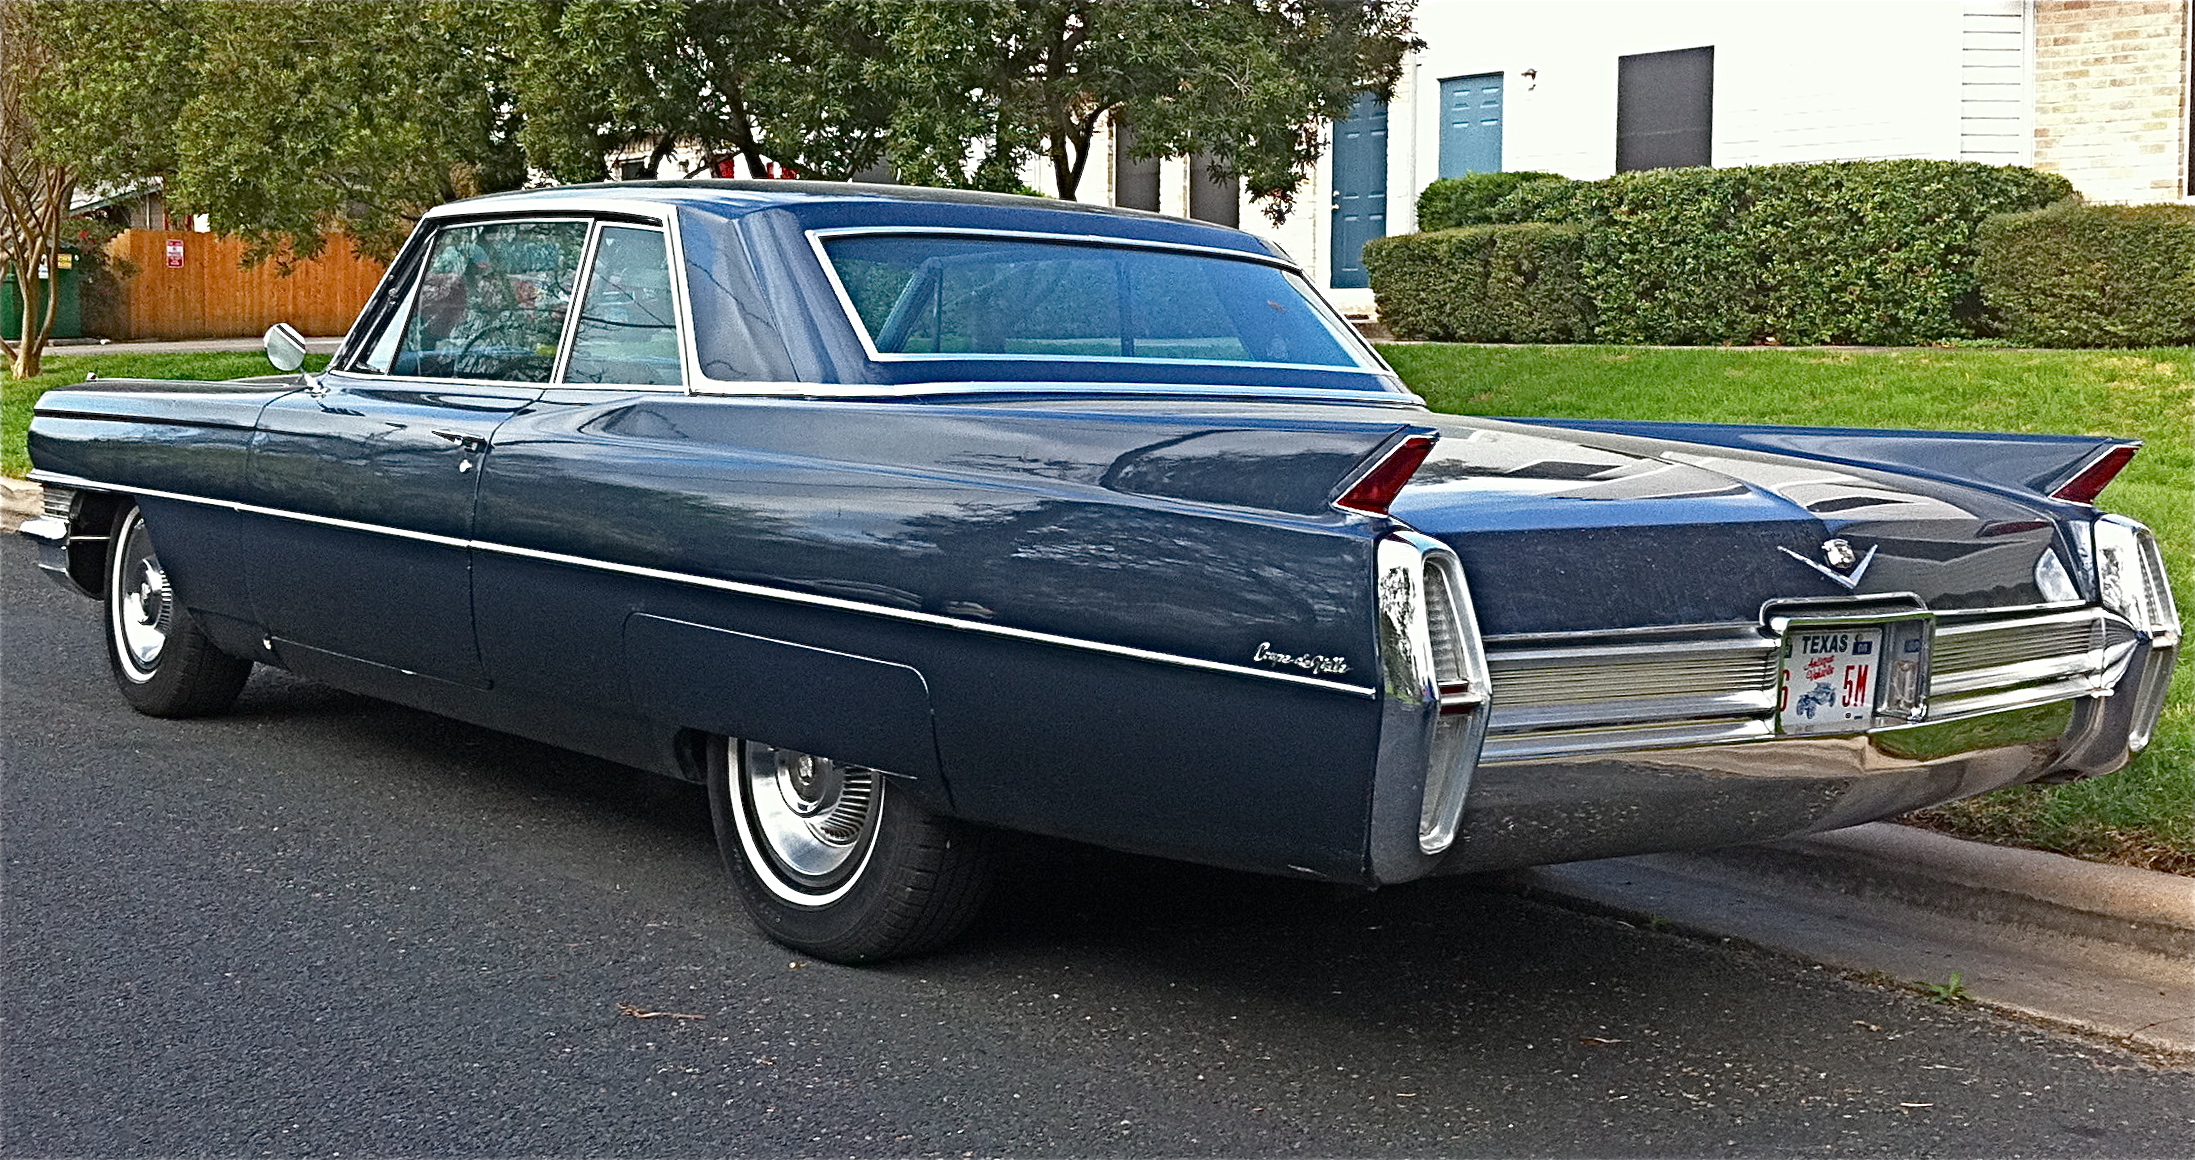 1964, Cadillac, Coupe, Luxury, Classic Wallpaper